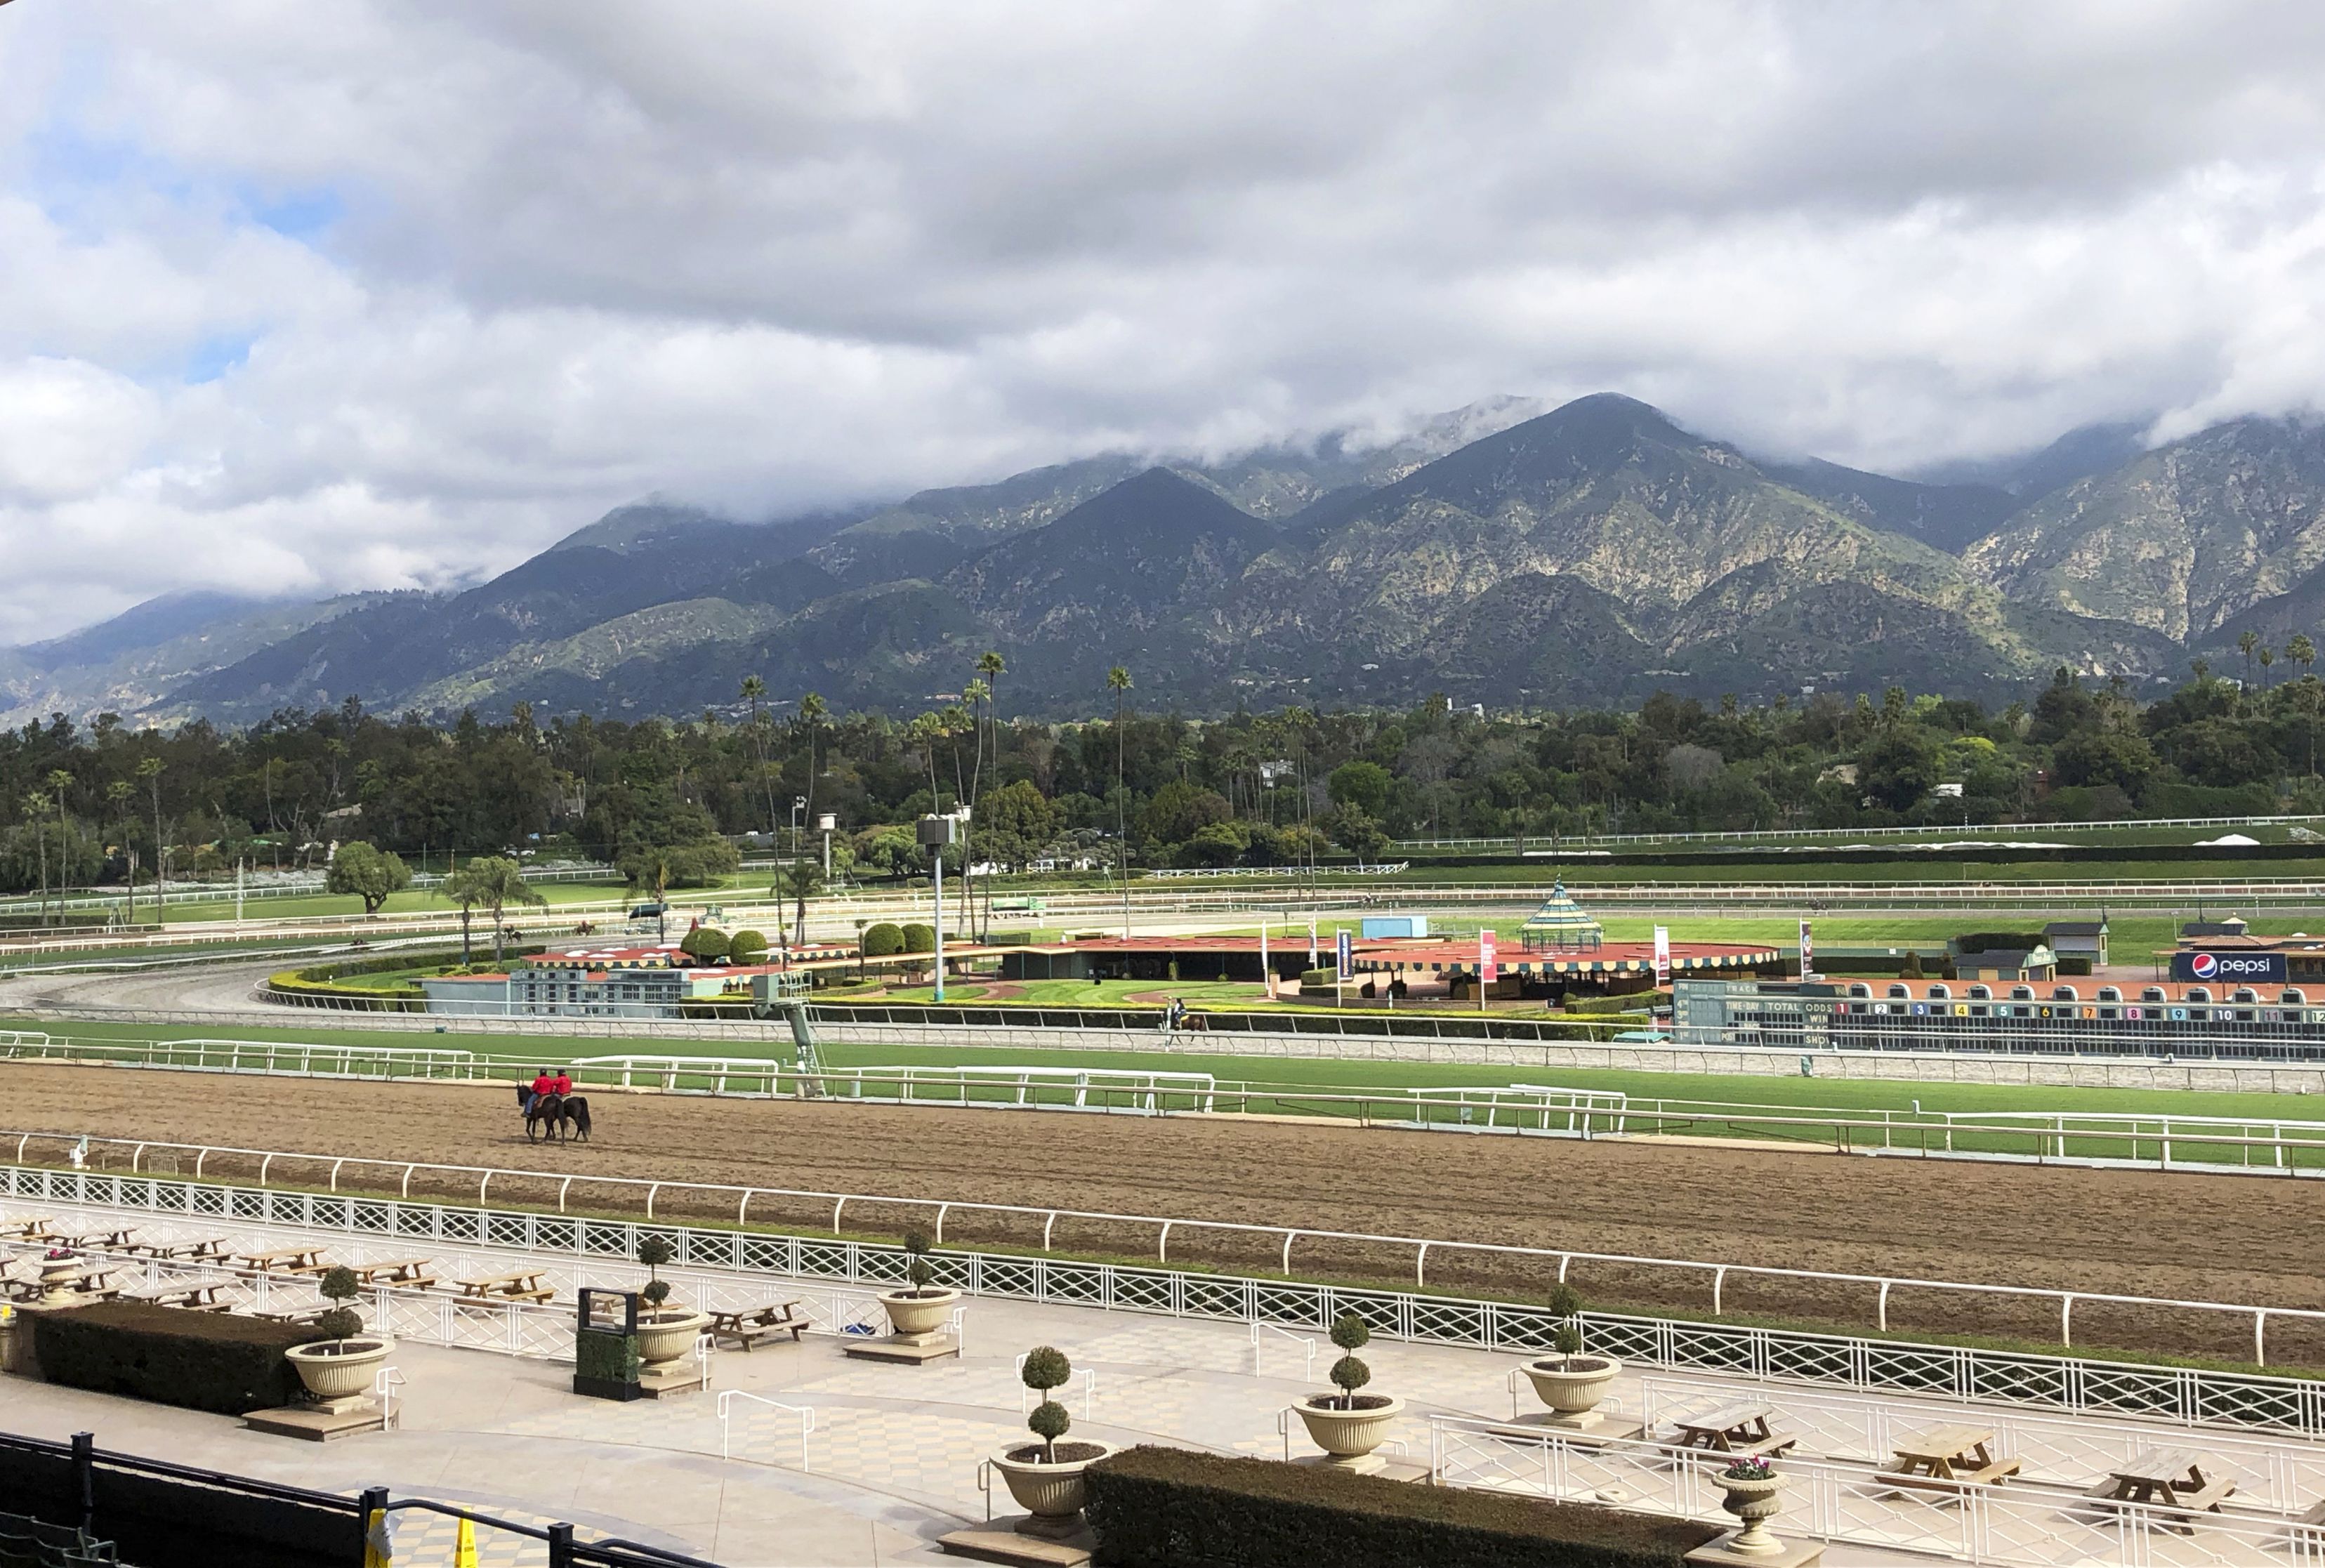 Death of 27th horse at famed LA racing park adds to calls for action